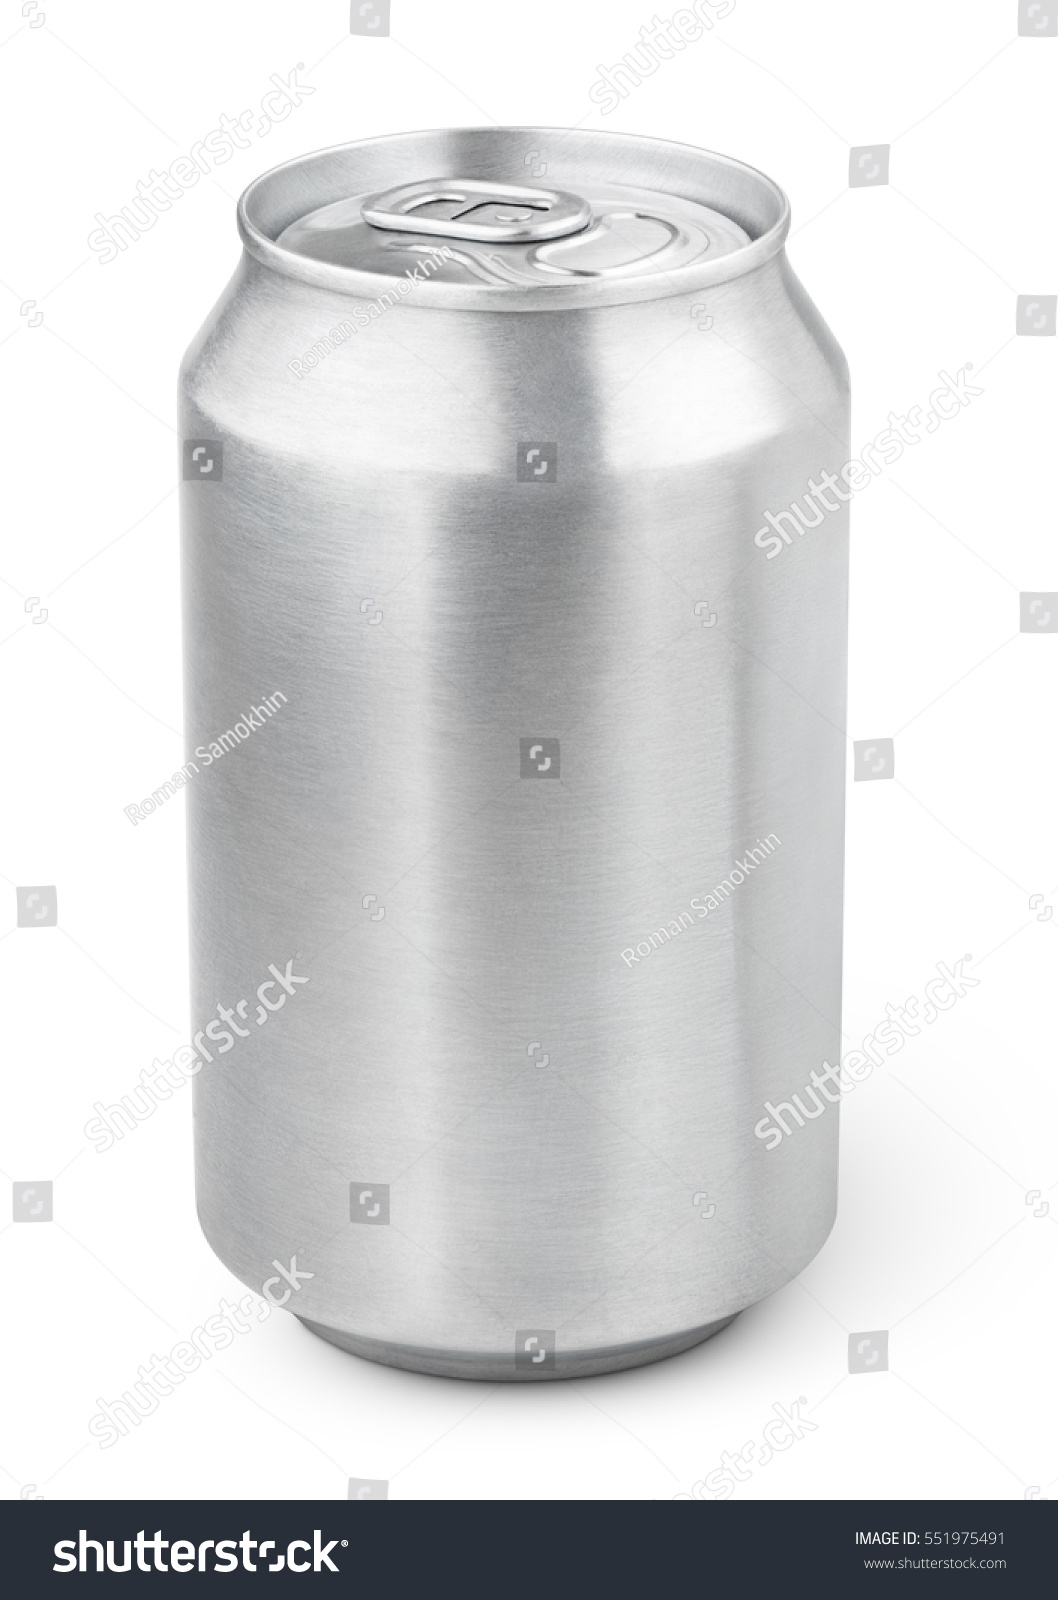 330 ml aluminum beverage drink soda can isolated on white background. 330ml aluminum soda can with clipping path #551975491